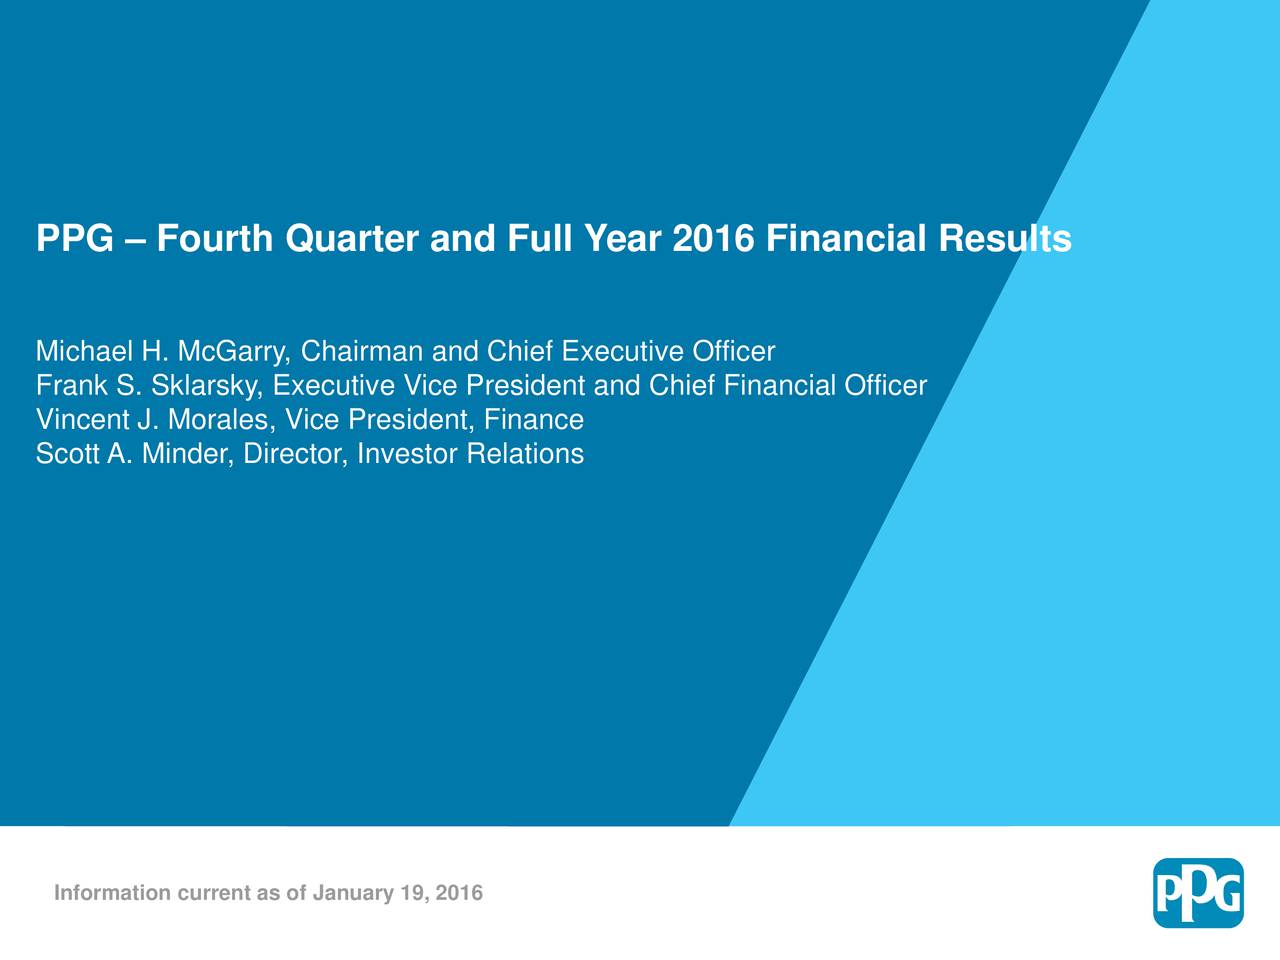 Michael H. McGarry, Chairman and Chief Executive Officer Frank S. Sklarsky, Executive Vice President and Chief Financial Officer Vincent J. Morales, Vice President, Finance Scott A. Minder, Director, Investor Relations Information current as of January 19, 2016